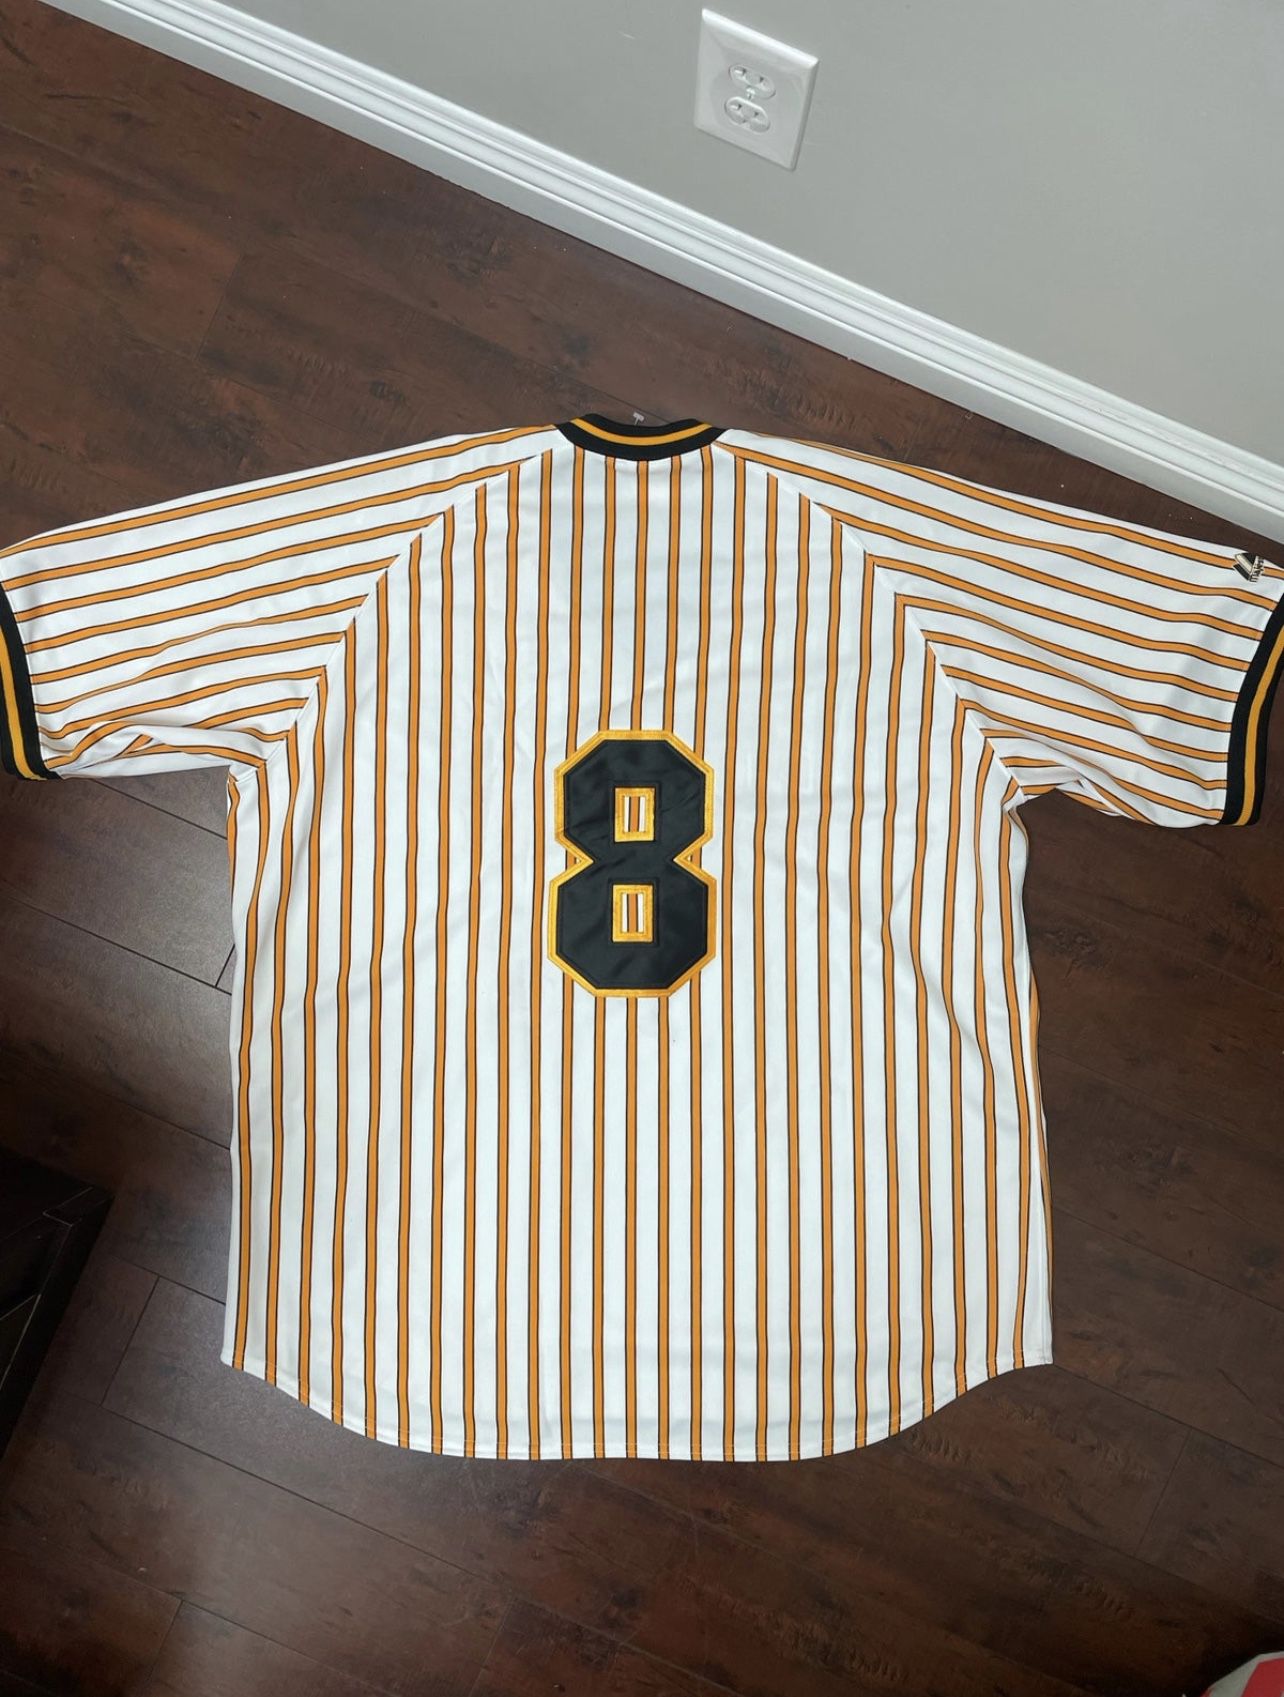 Mitchell & Ness Willie Stargell Pittsburgh Pirates Cooperstown Collection Jersey-Gold - S - Gold